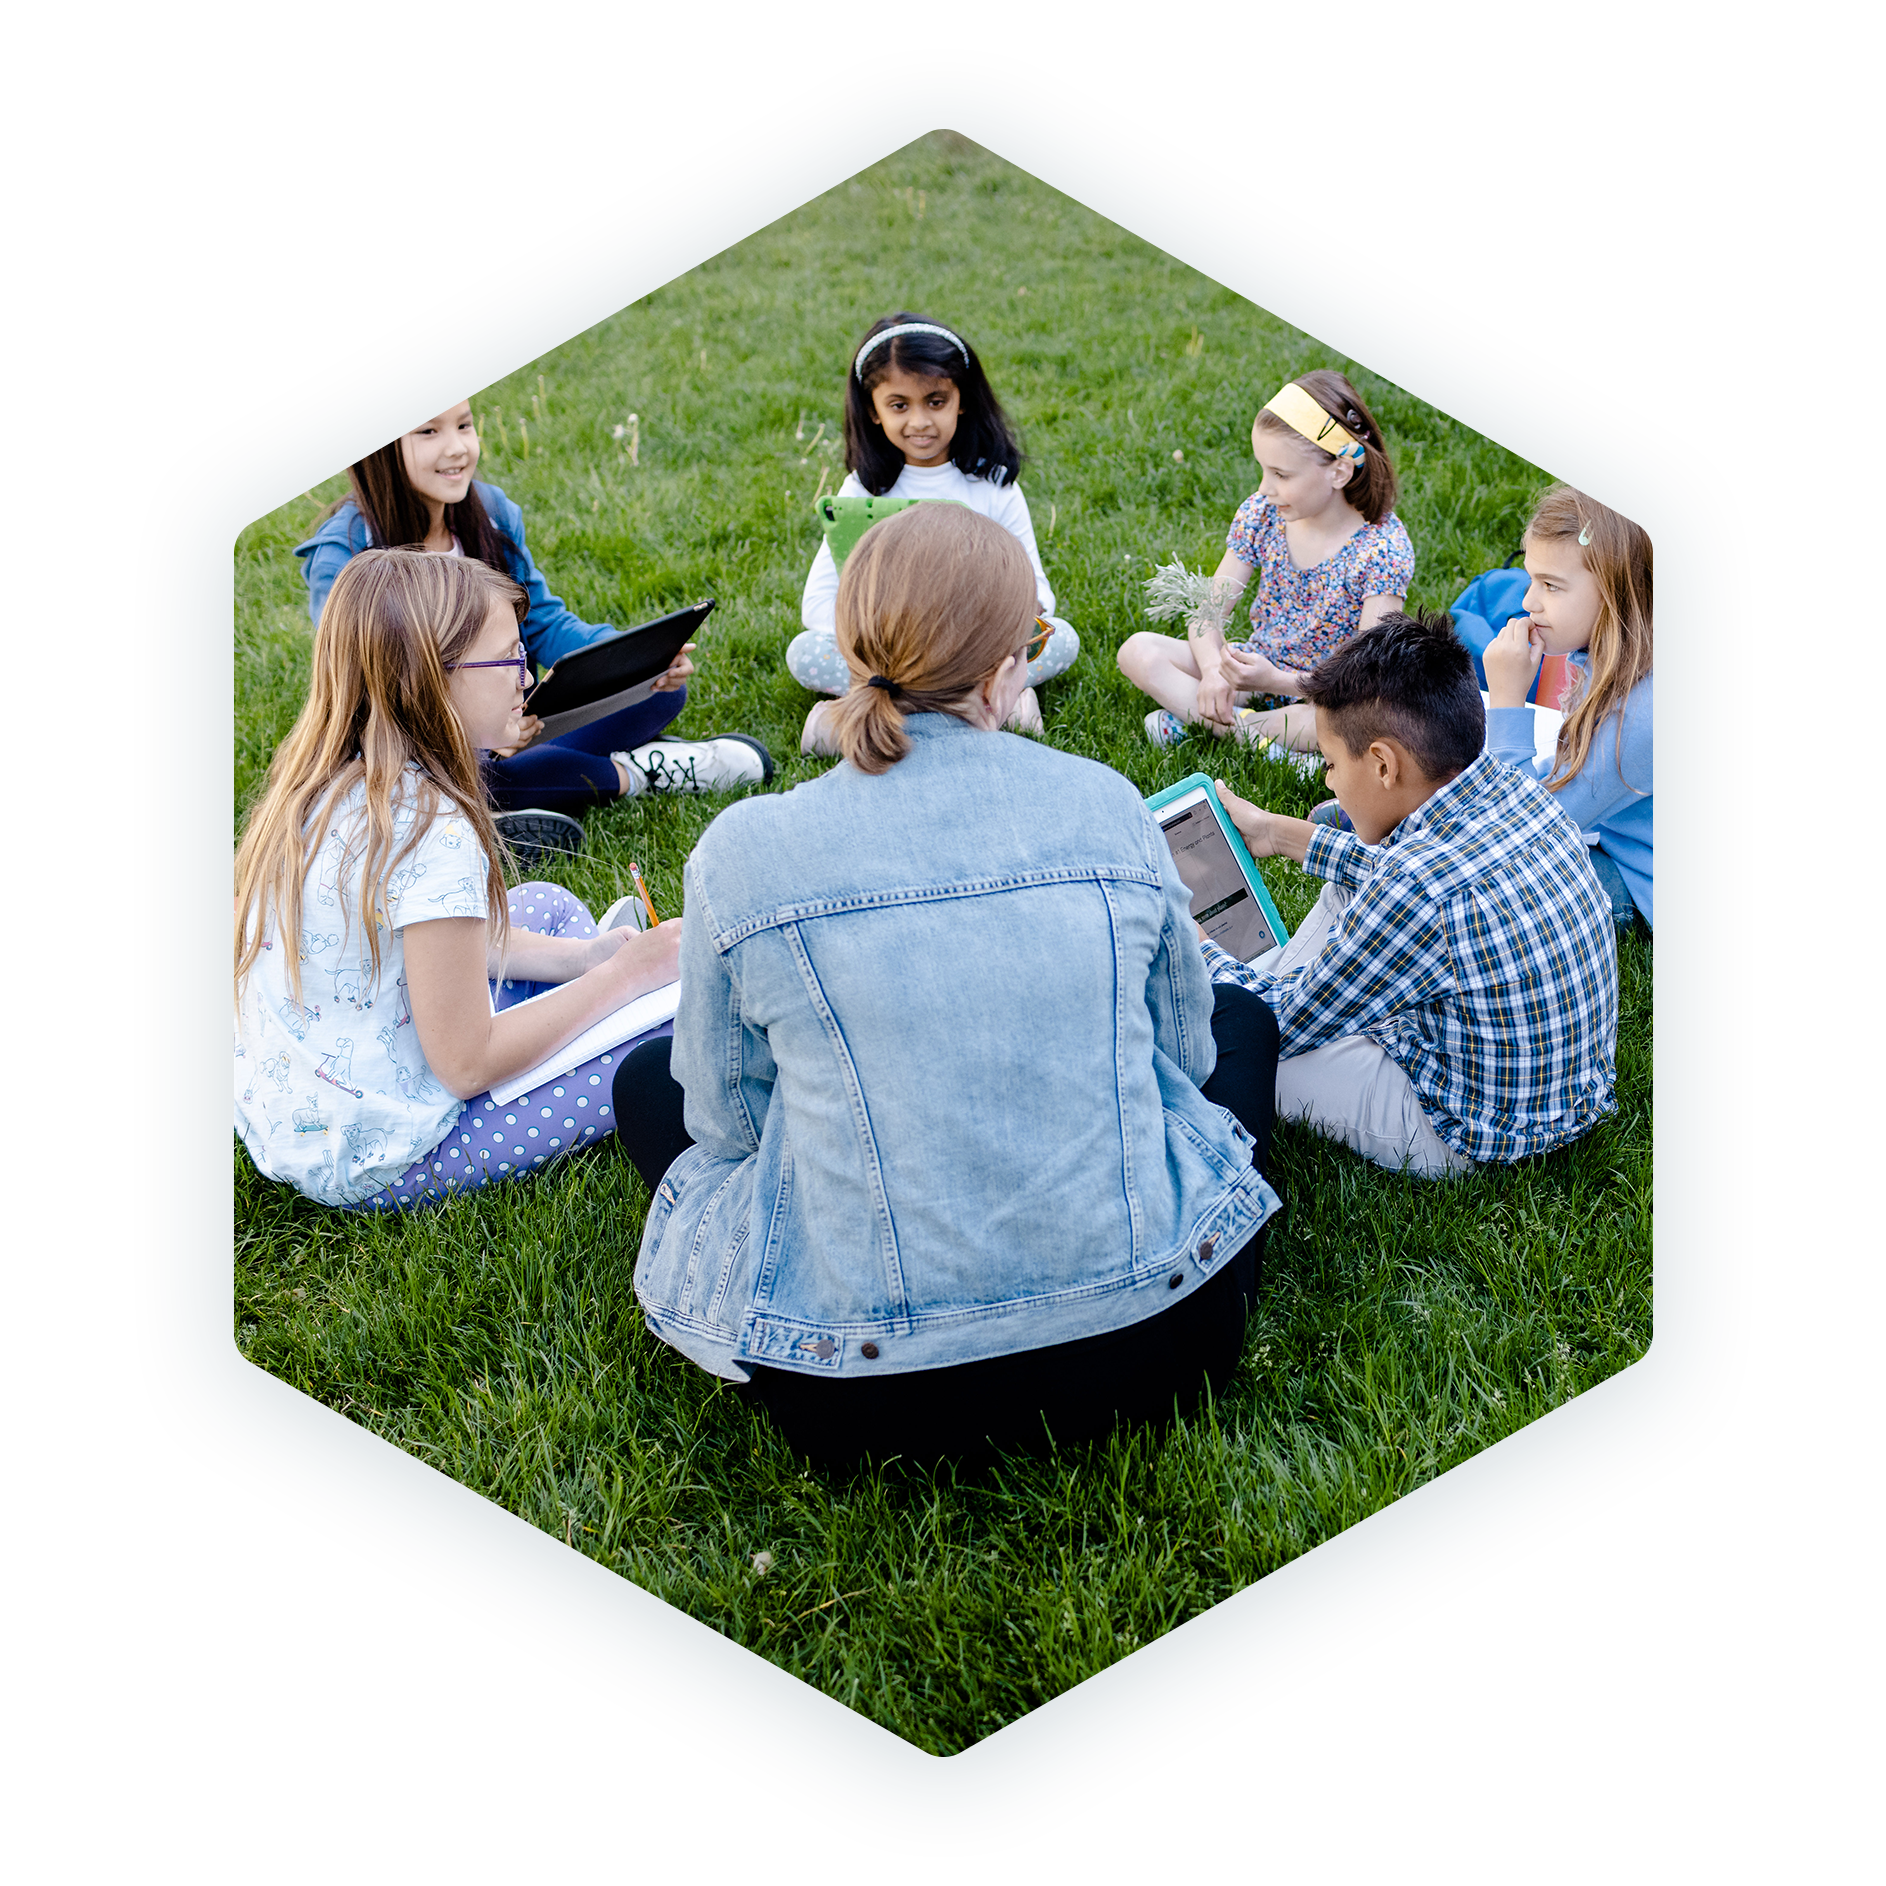 A teacher and students forming a circle and sitting on the grass